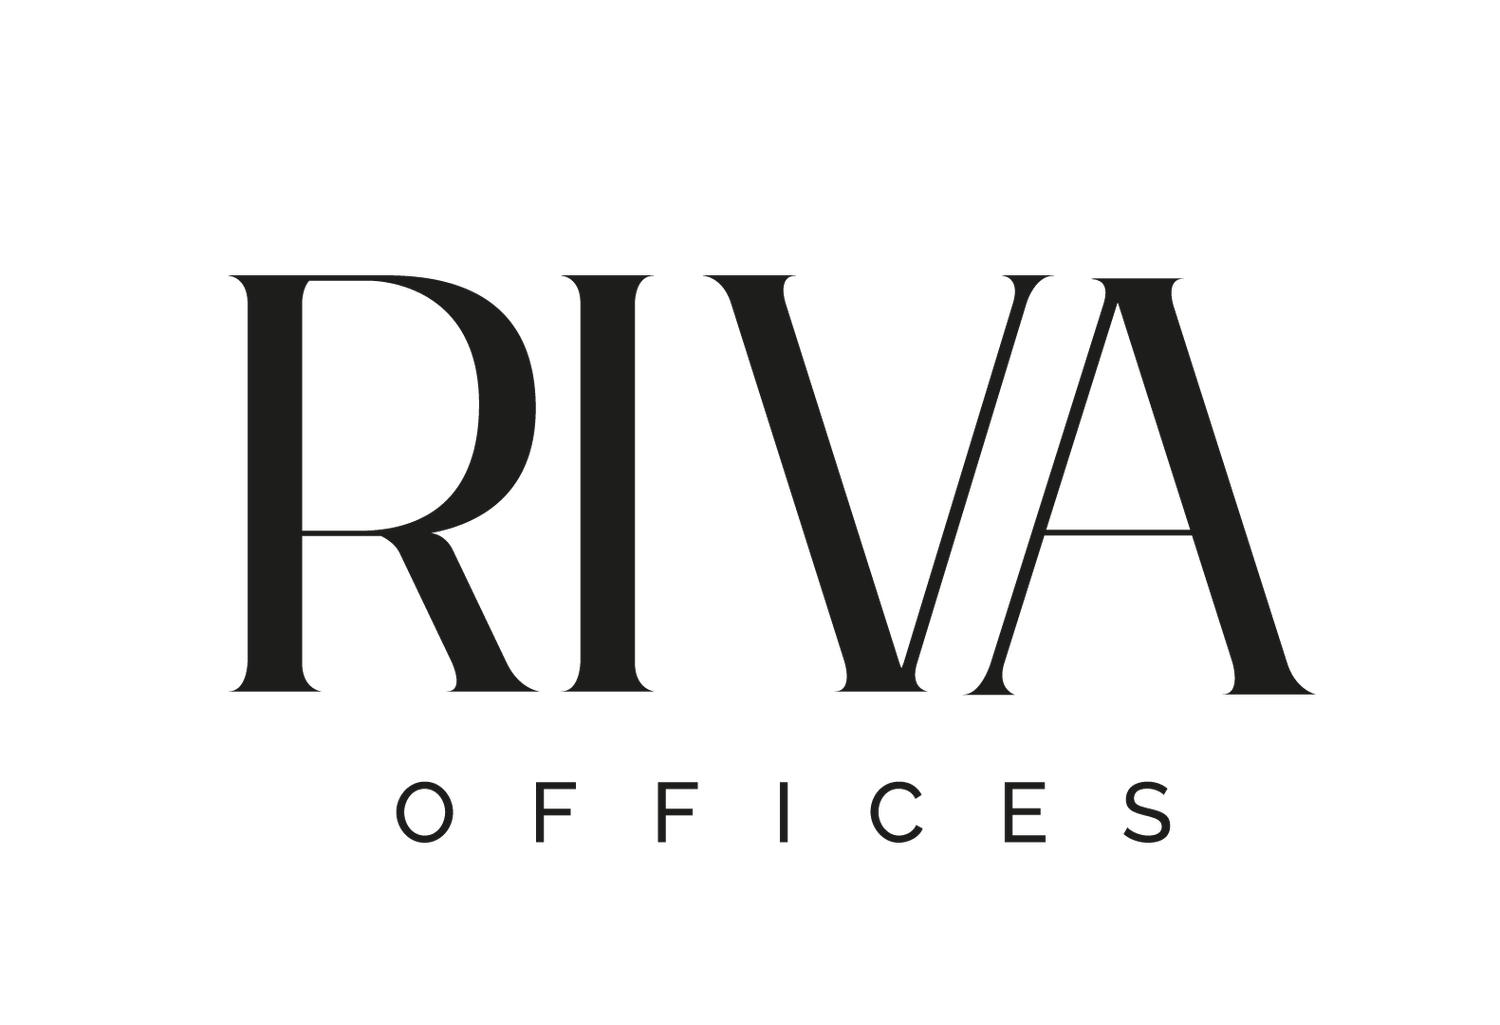 Riva Offices